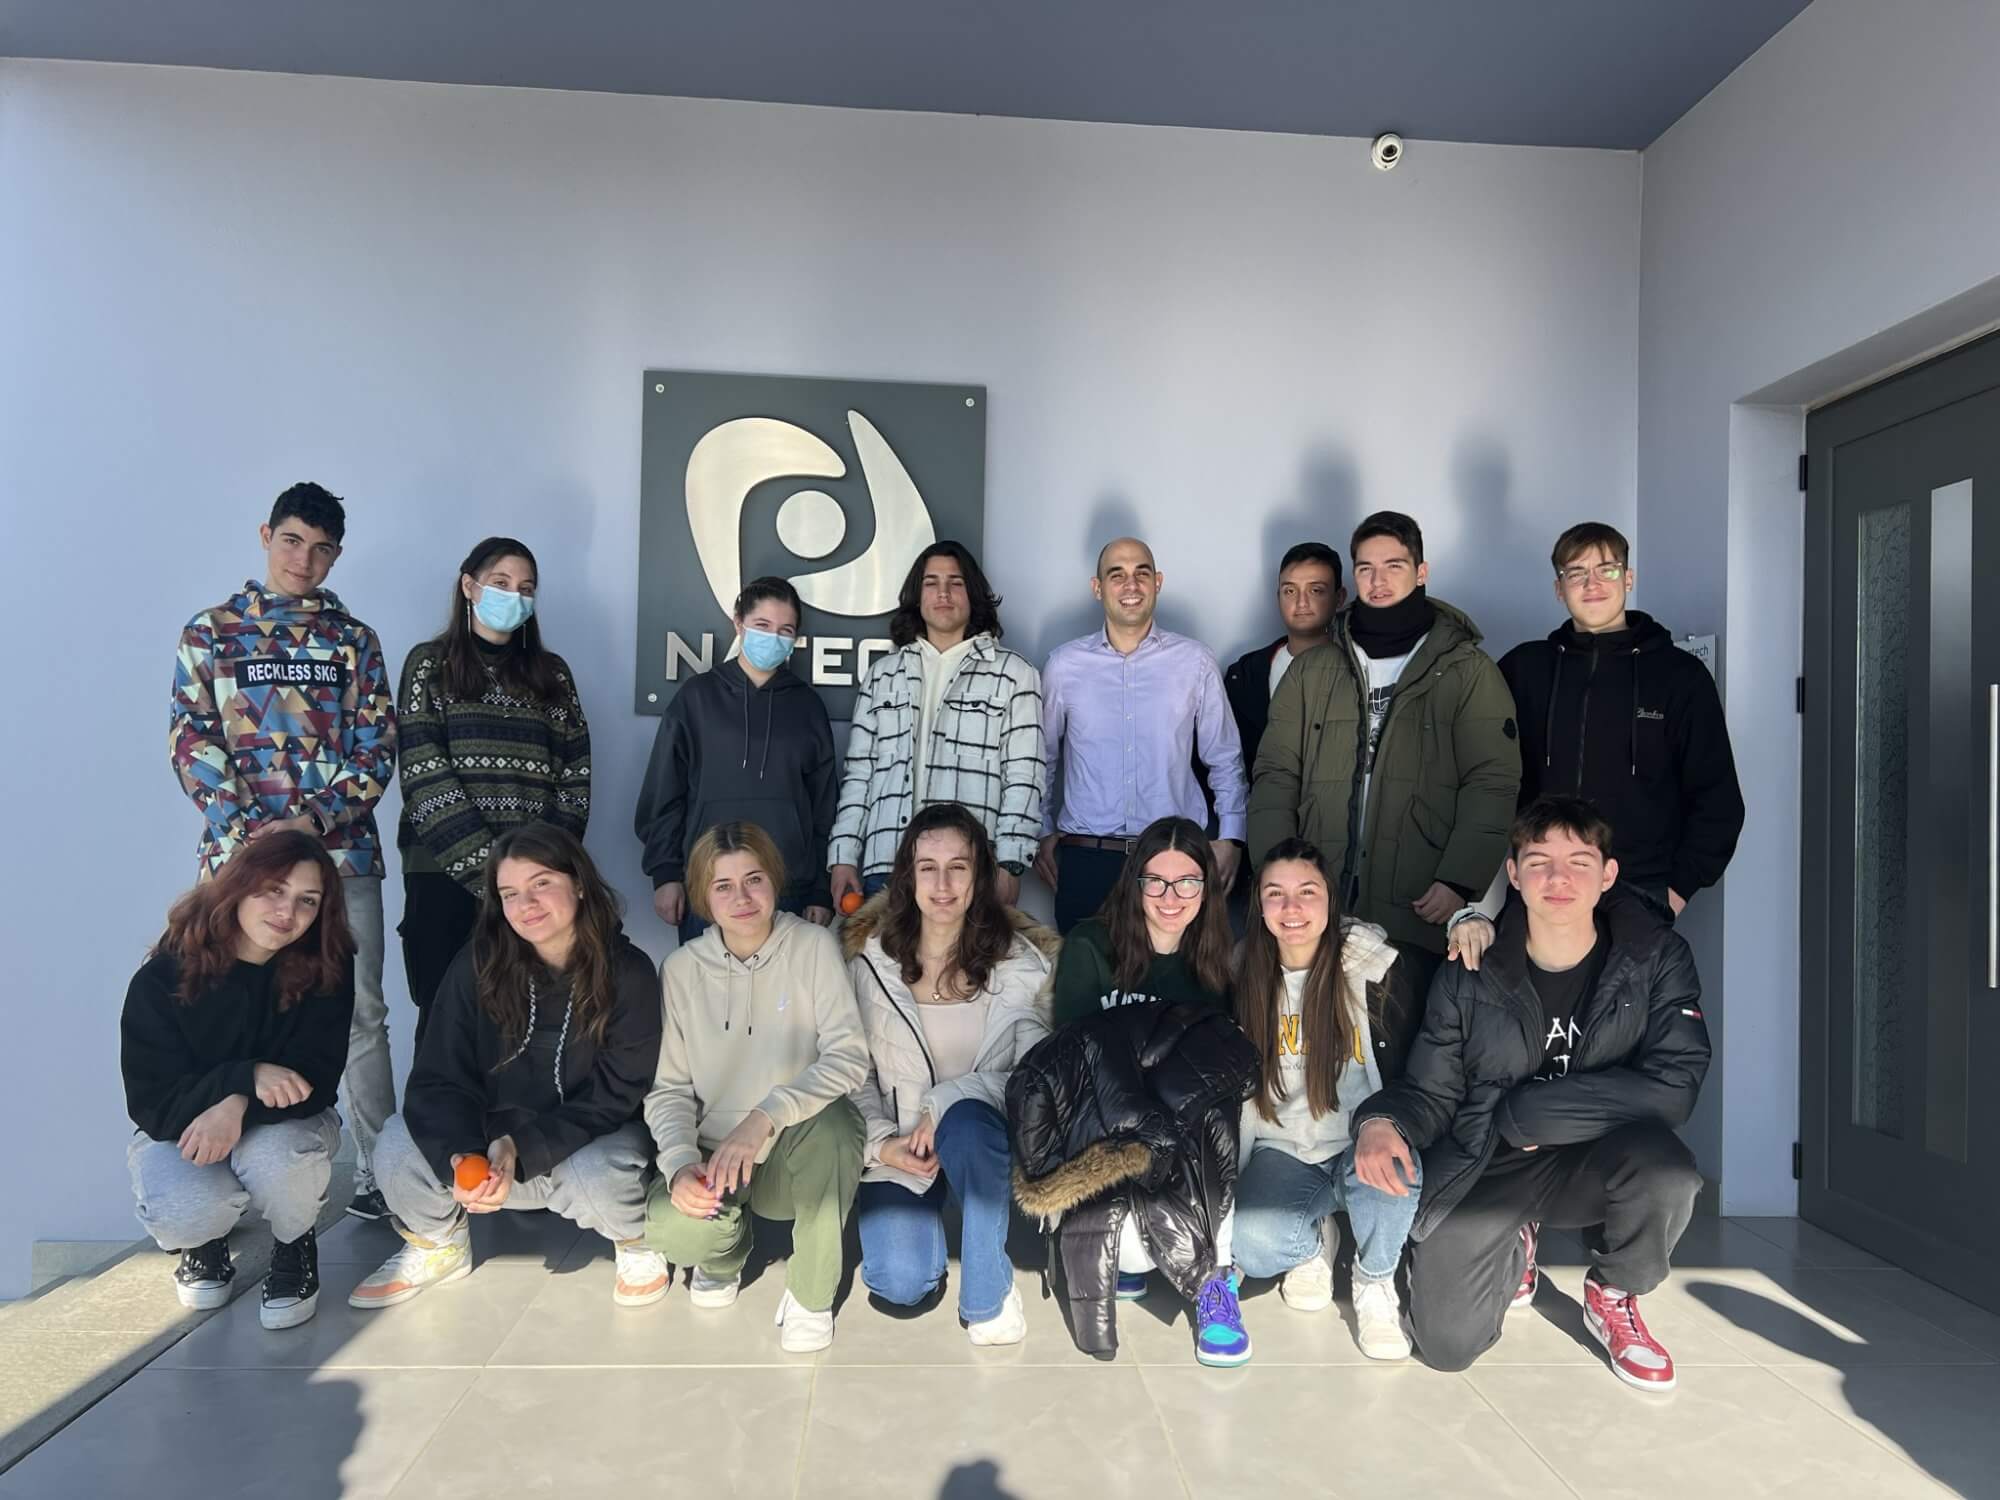 Natech news: Students of the Hellenic-Austrian Education of the Zografio School of Ioannina visited Natech